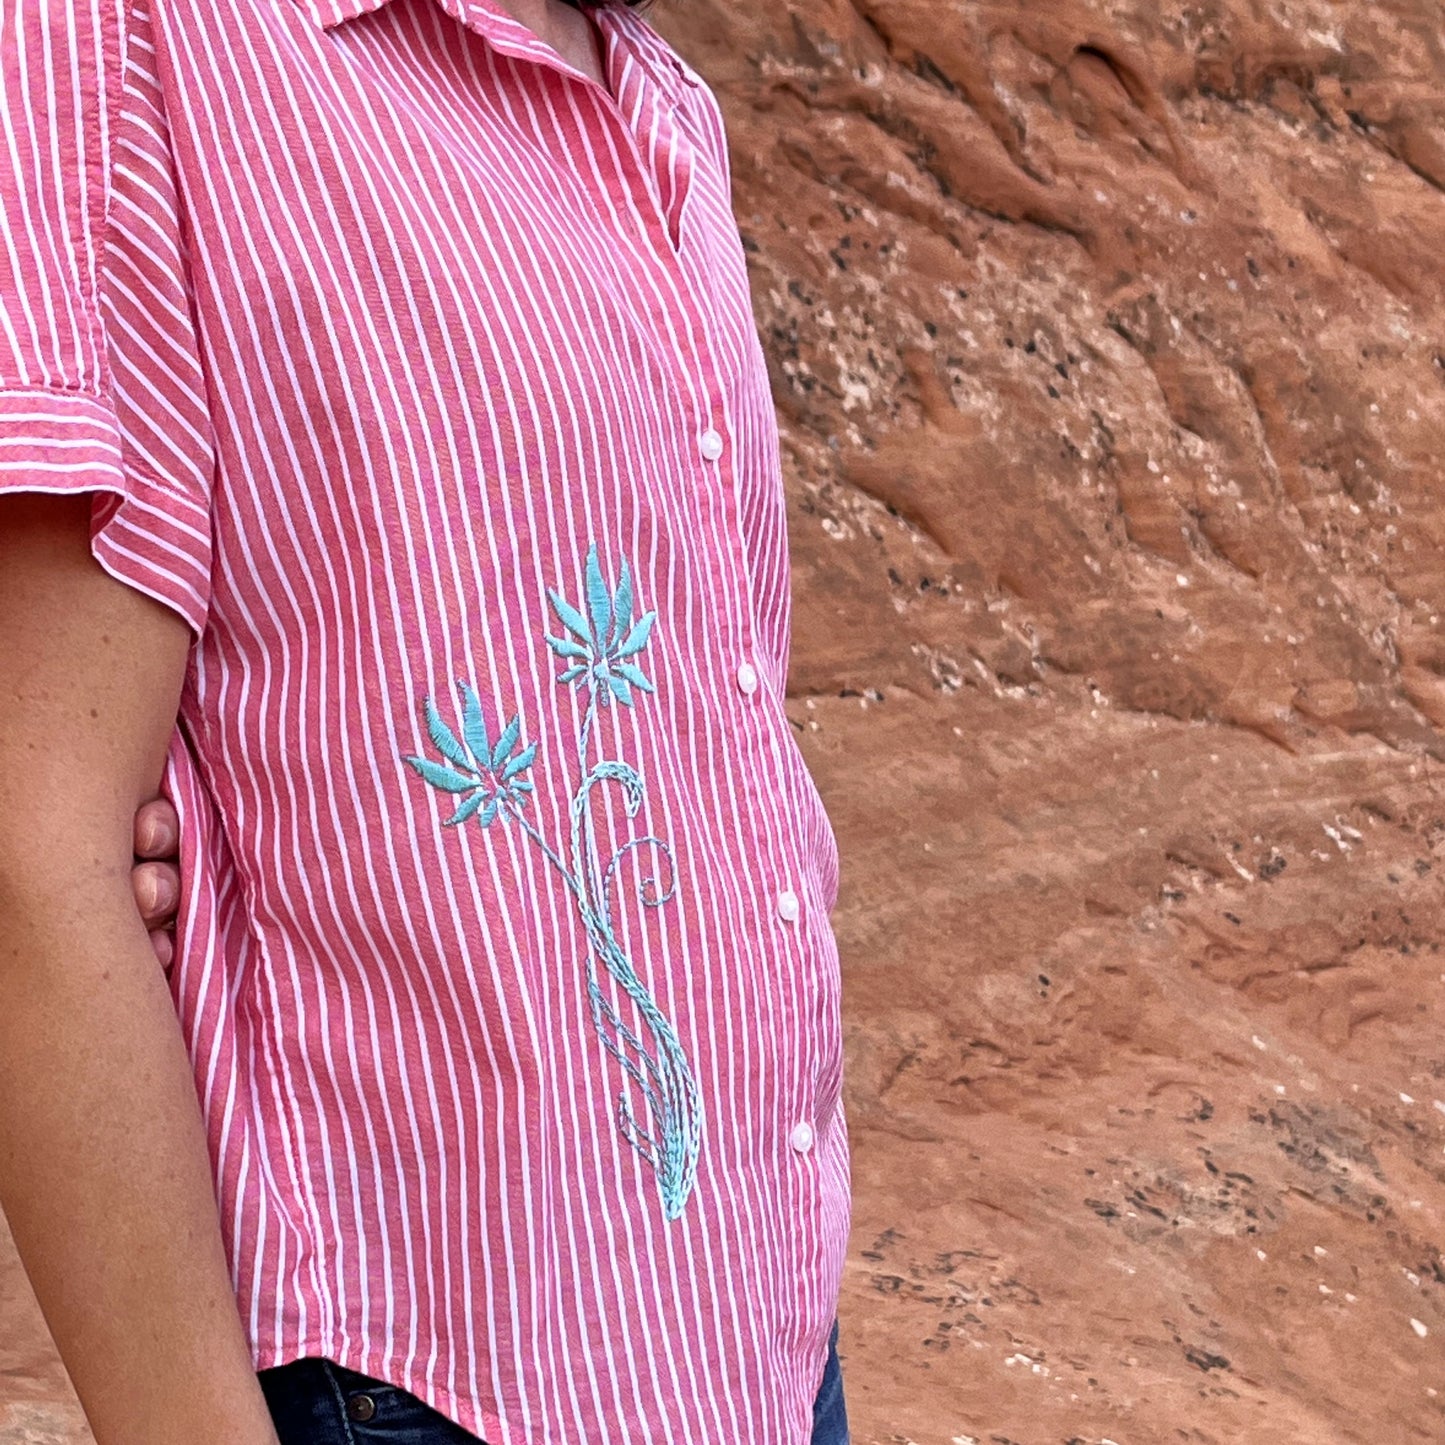 side view of a woman's torso in a red and white striped button-up short sleeve shirt, with two hand embroidered long stemmed flowers in aqua on the lower front right side of the shirt